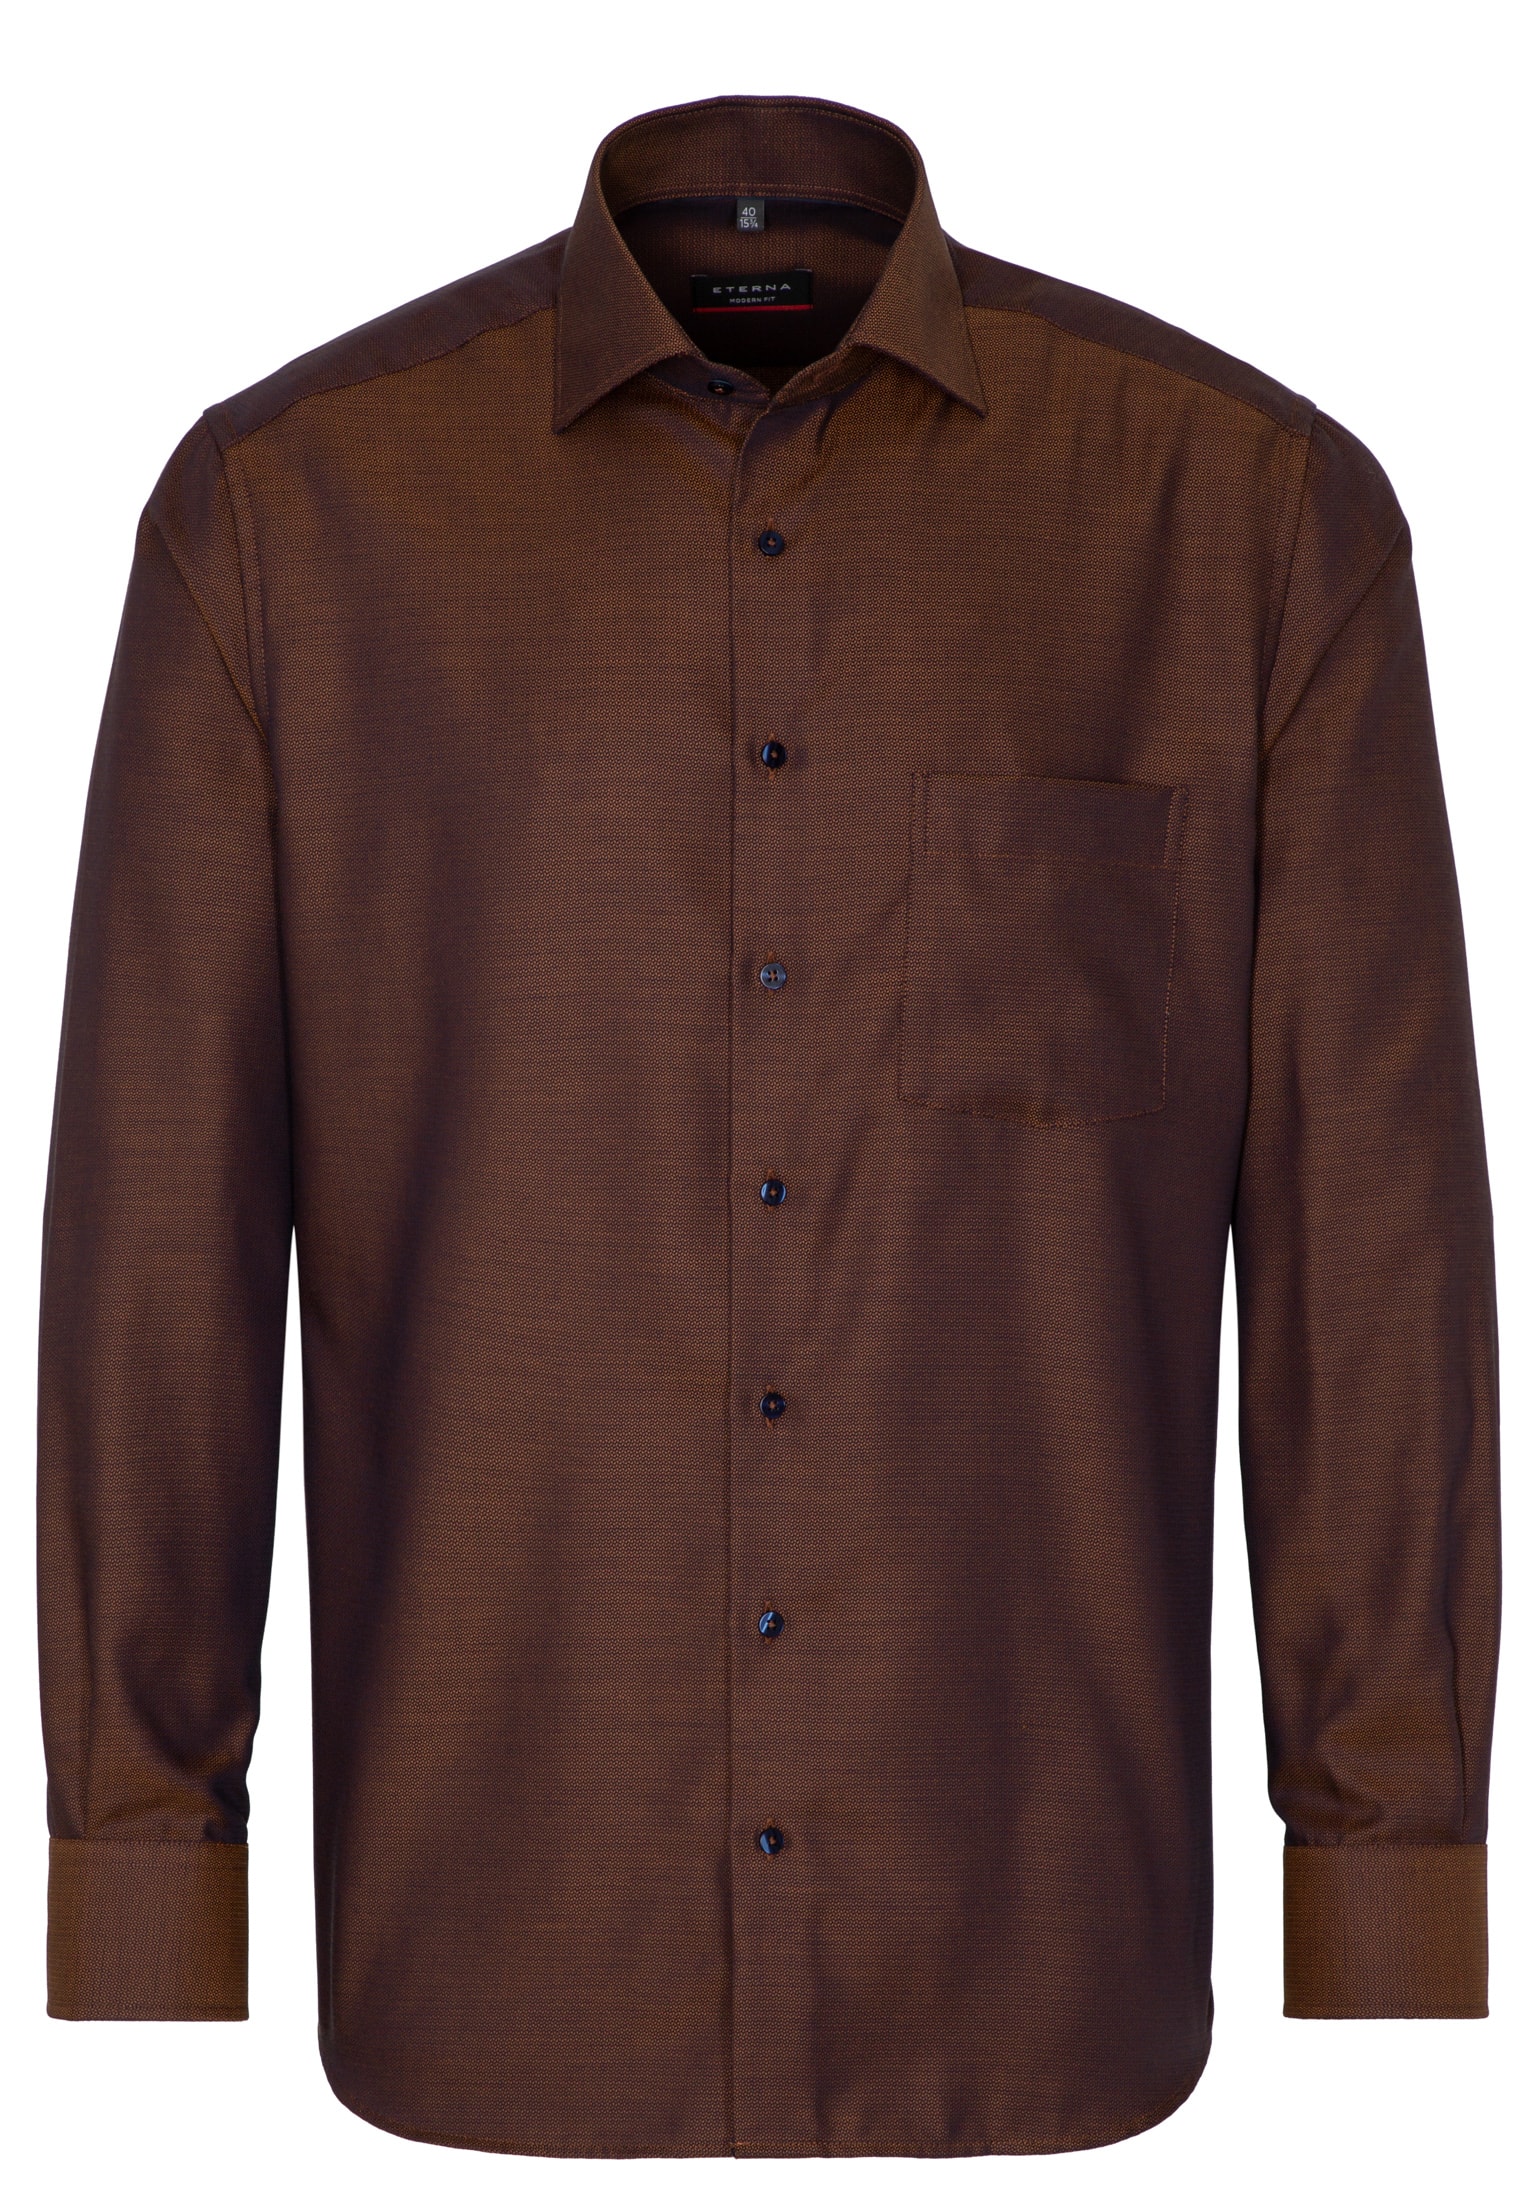 MODERN FIT Shirt in brown structured